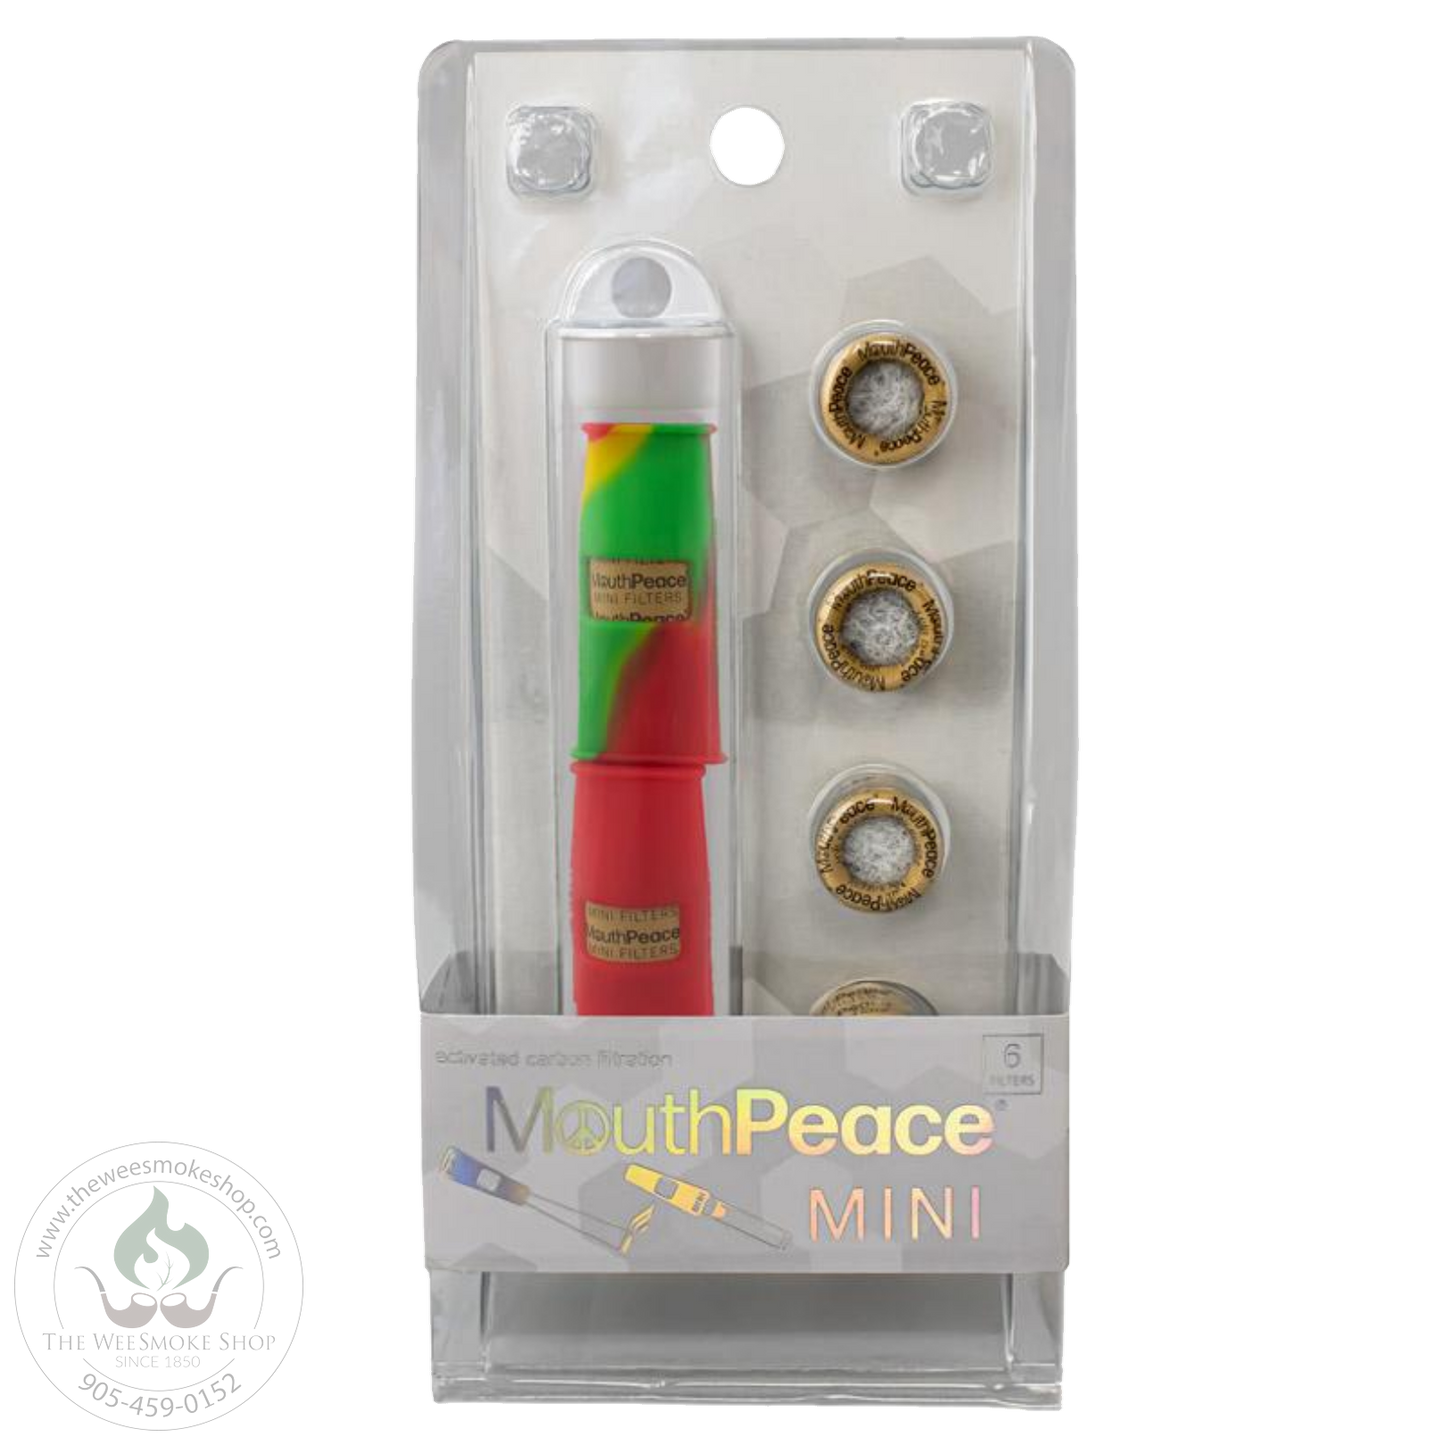 Moose Labs MouthPeace Mini in the color red and green swirl